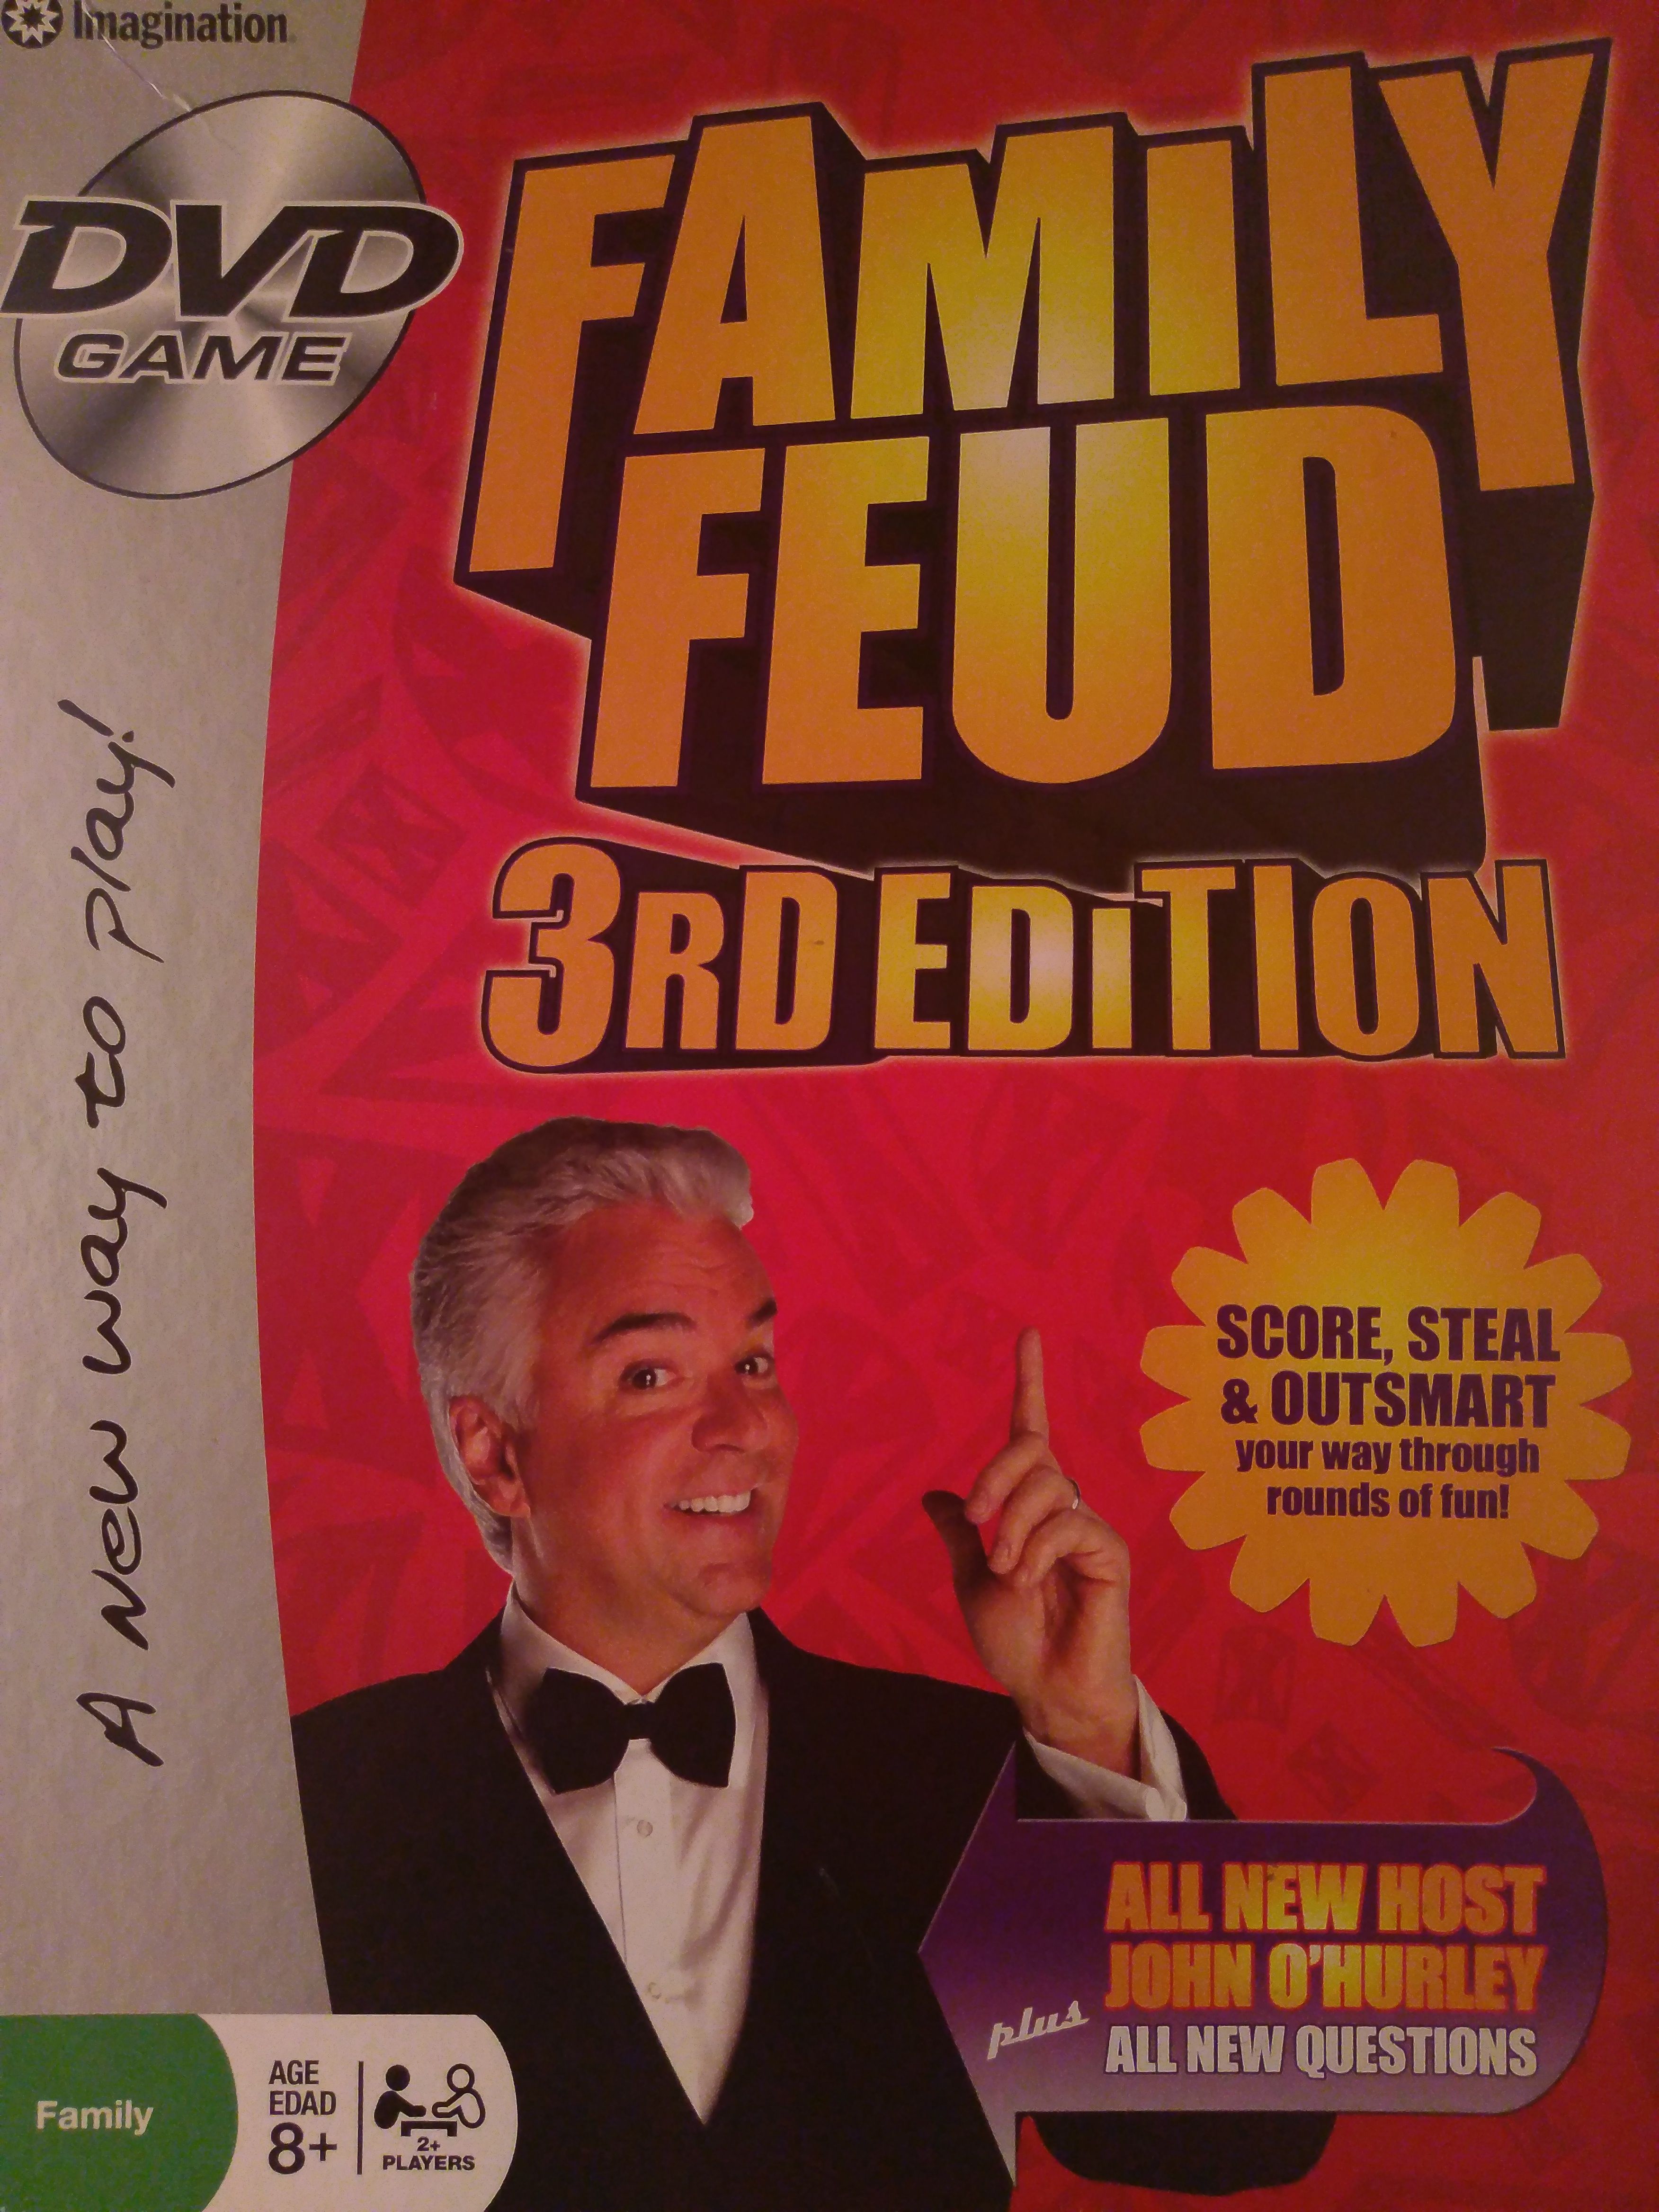 Family Feud: DVD Game